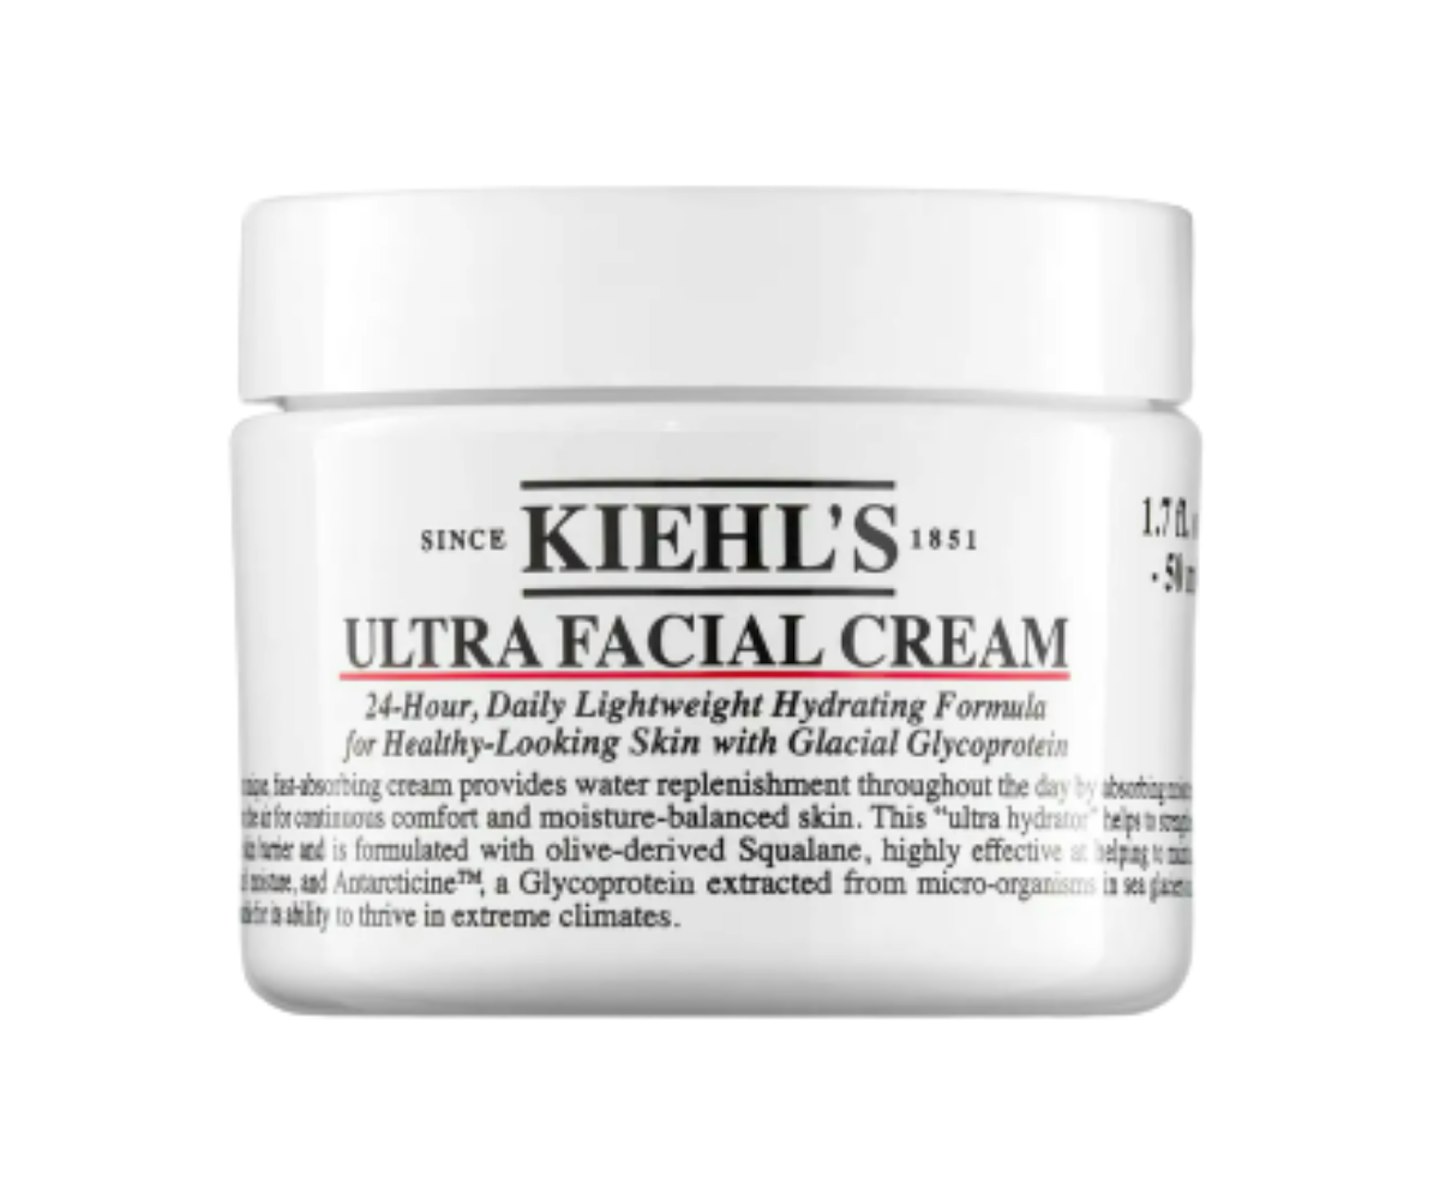 A picture of the Kiehl's Ultra Facial Cream